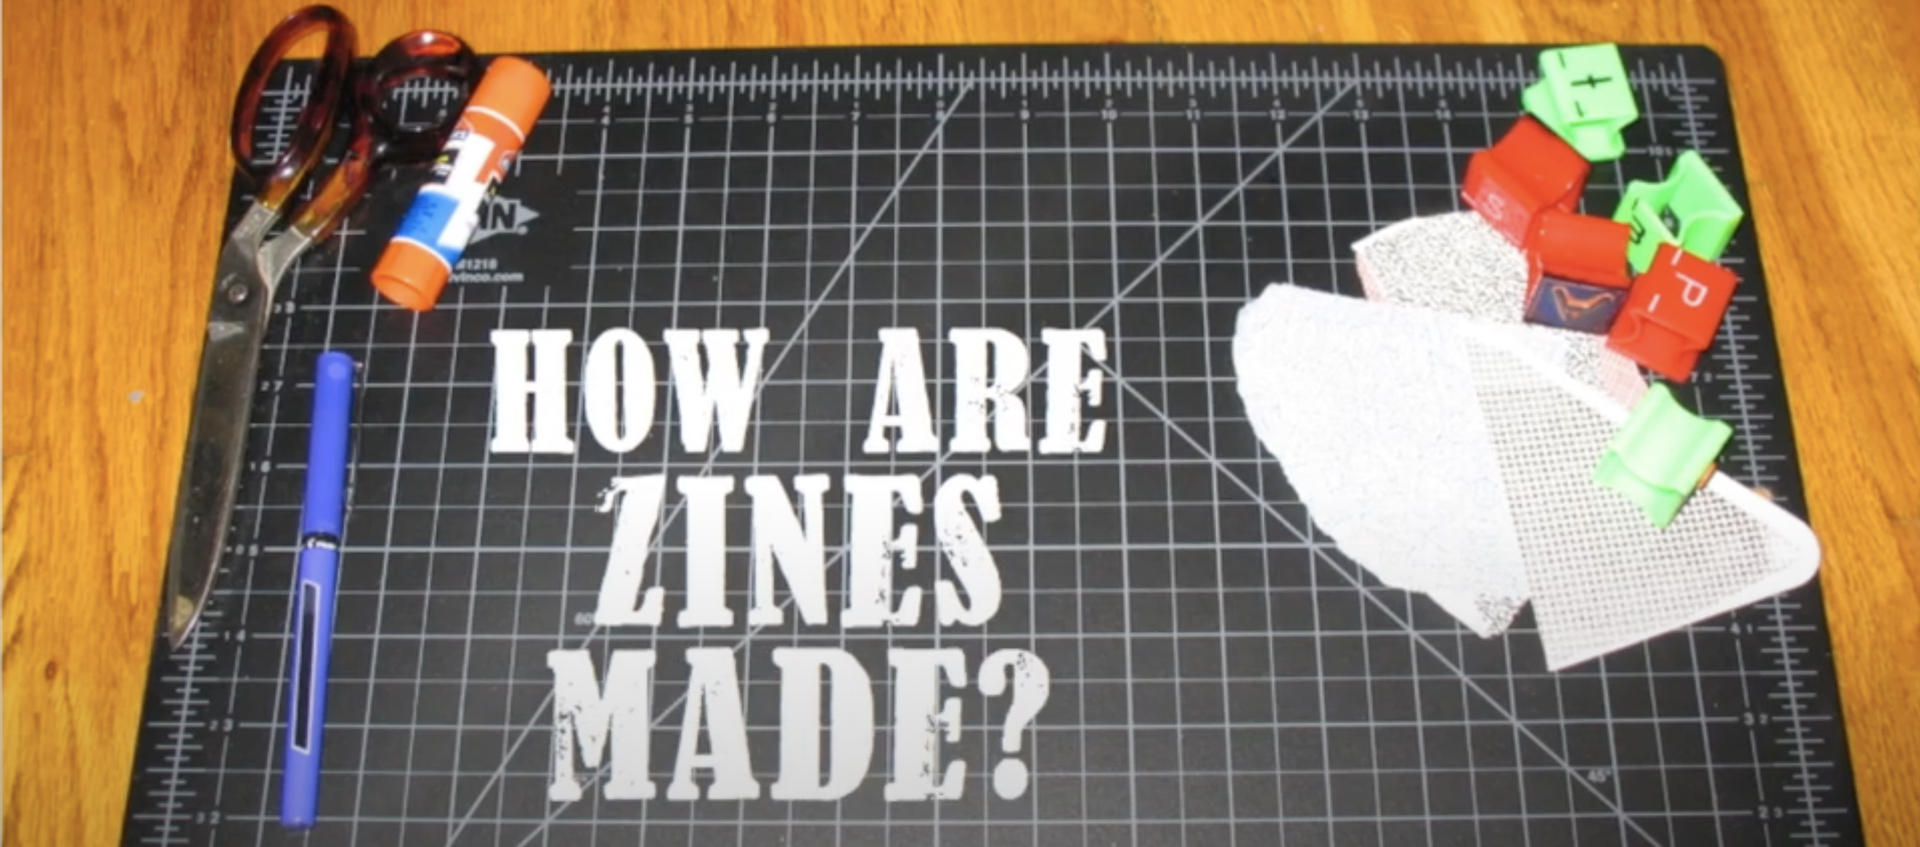 Image of a grid-covered cutting board on a wood table, covered in drawing and cutting tools and marked by the text graphic "How are zines made?"